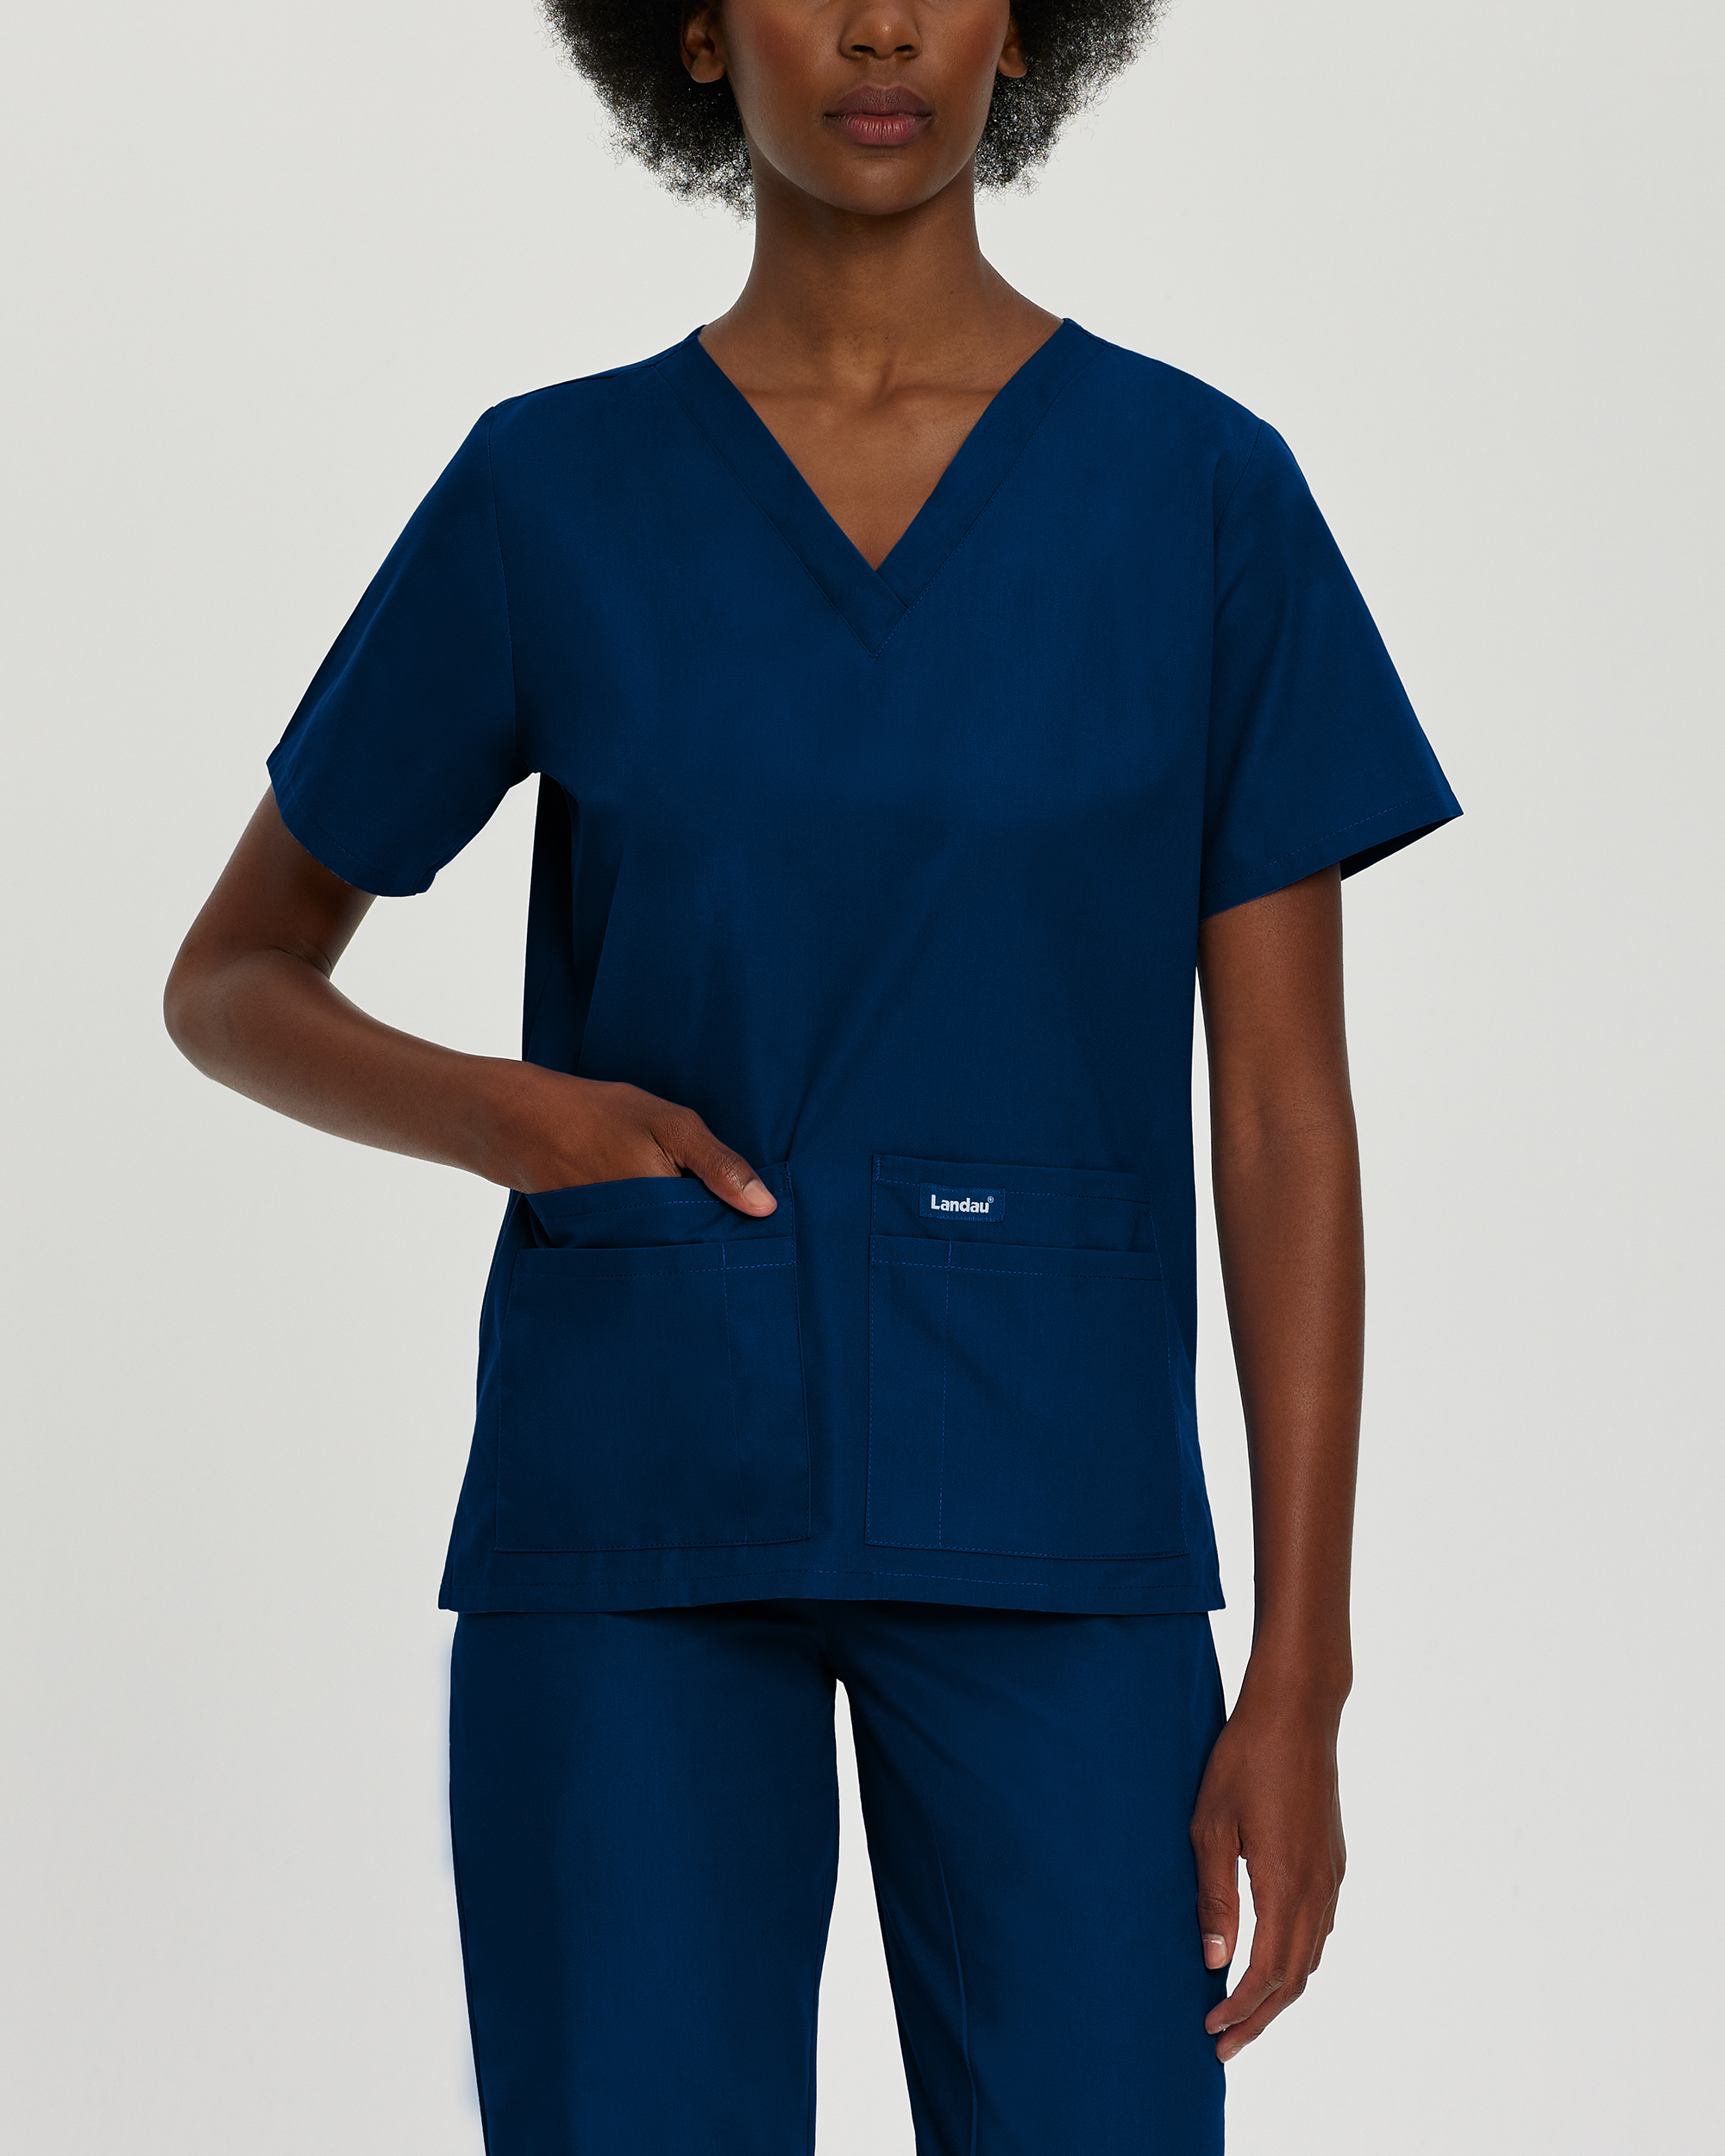 What are the features of the V-neck scrub top?